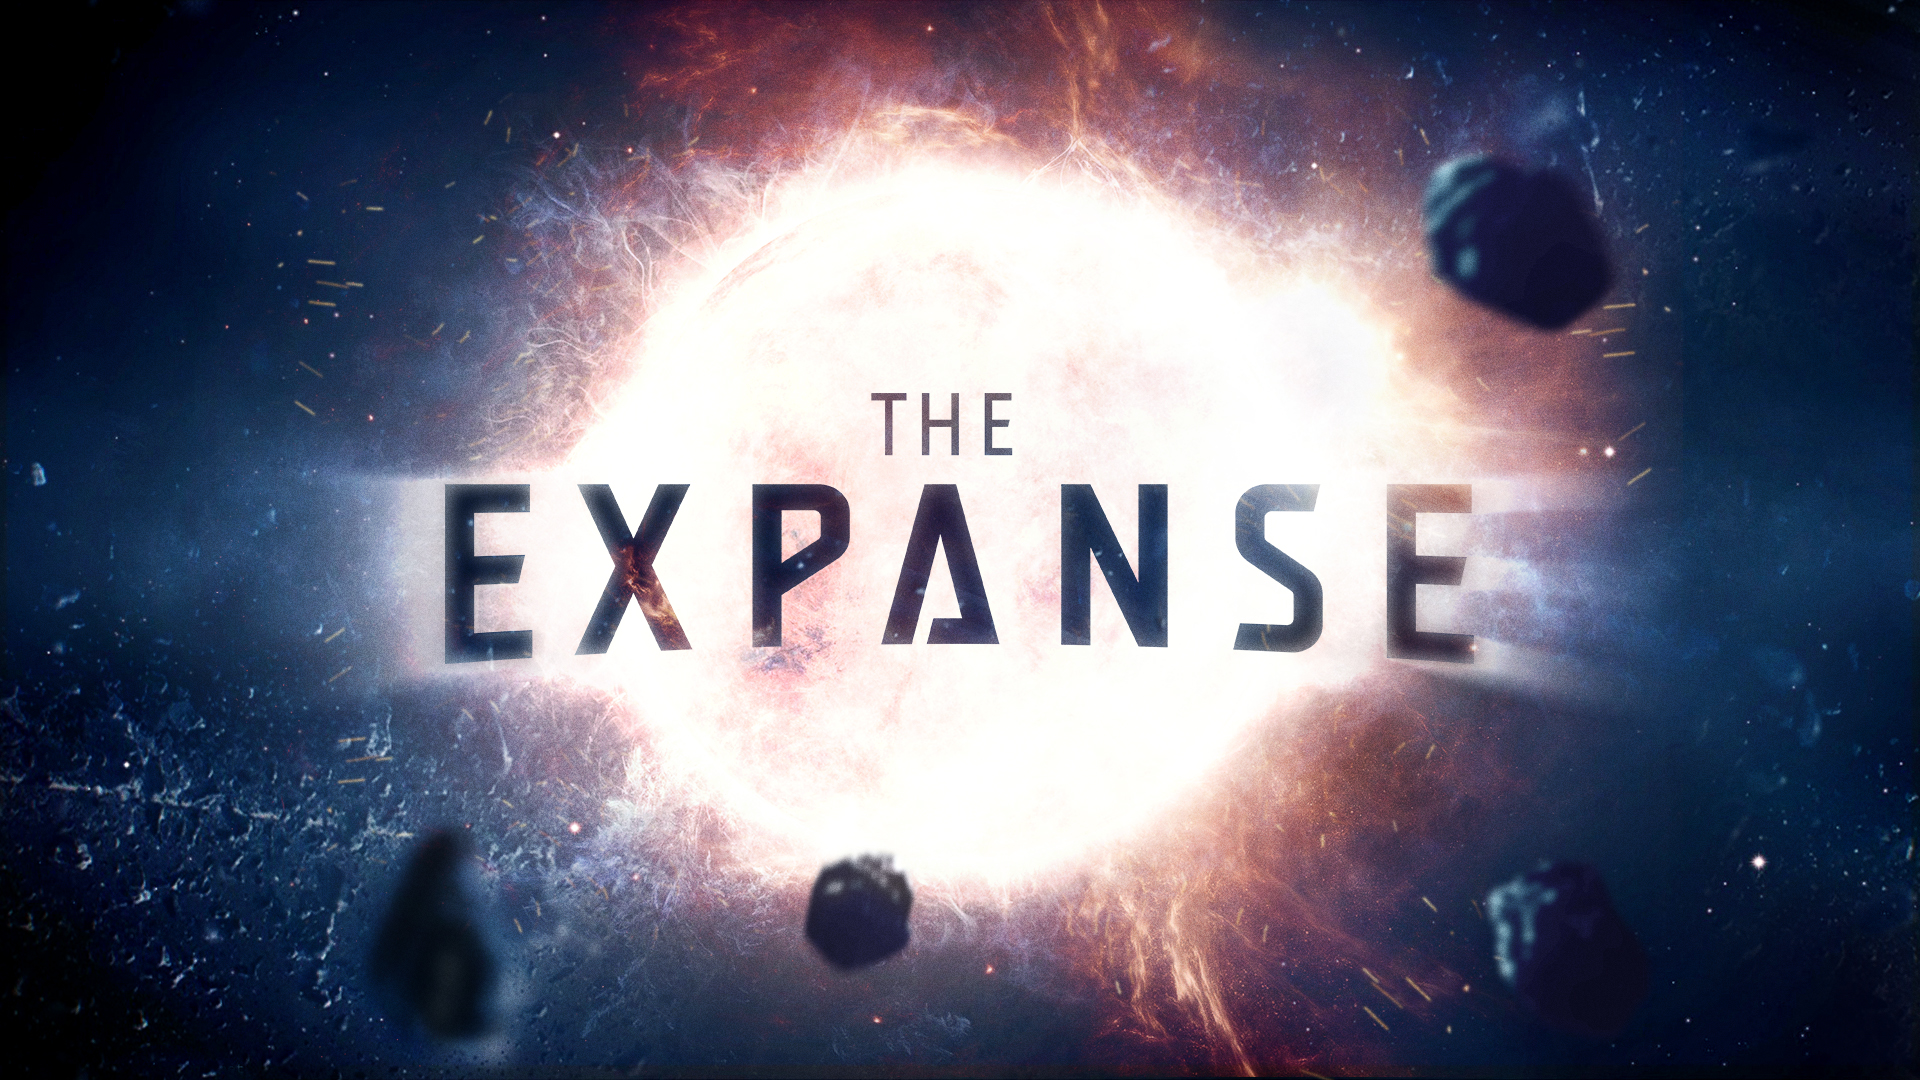 The Expanse #5